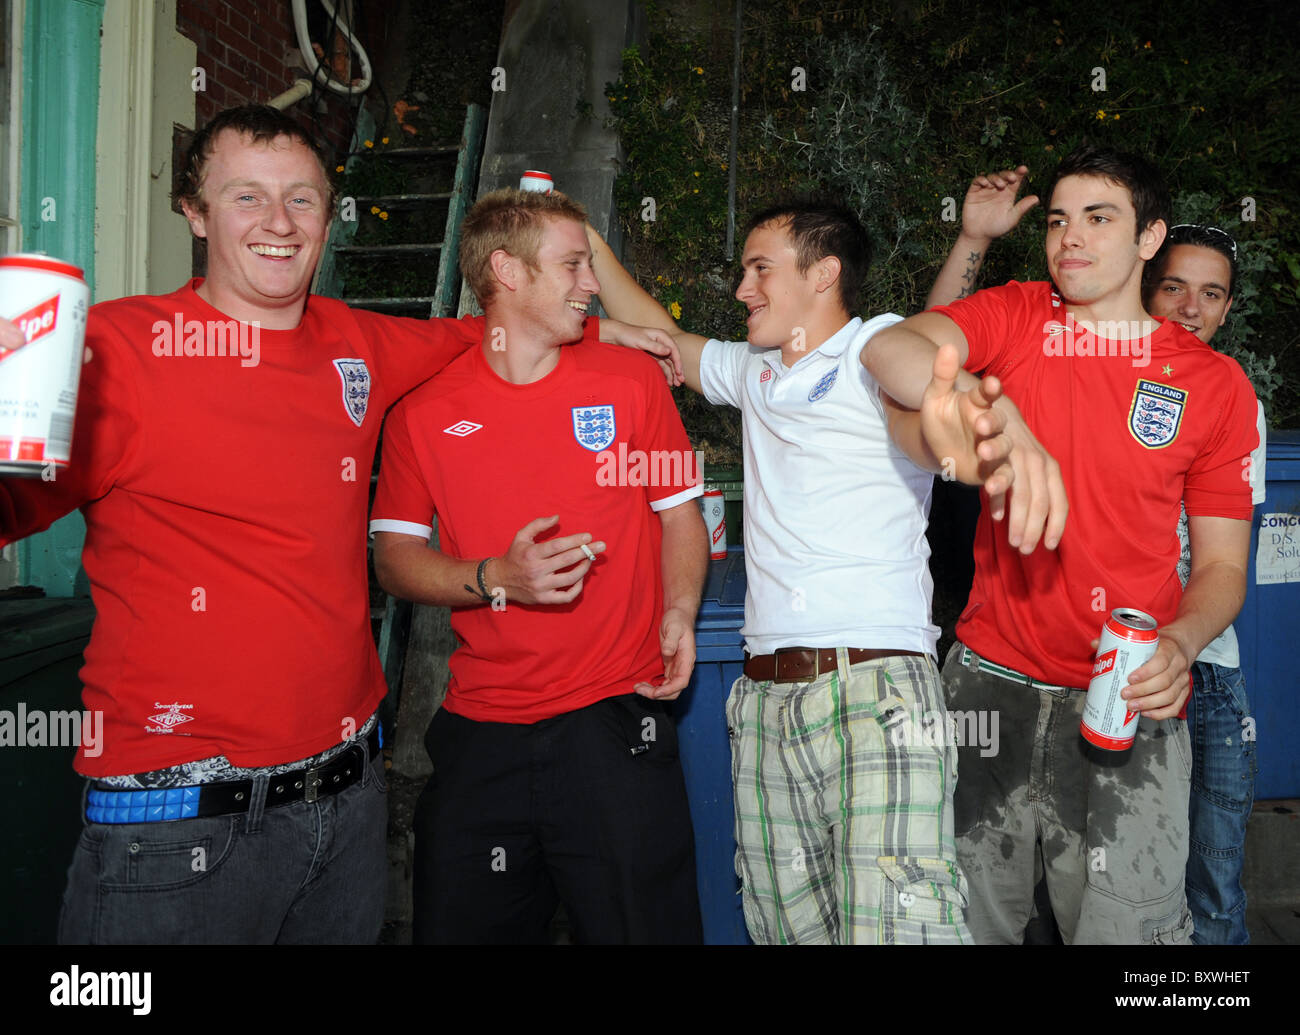 England football fans getting ready to cheer on the team during the 2010 world cup at the Concorde 2 a bar with a large screen Stock Photo